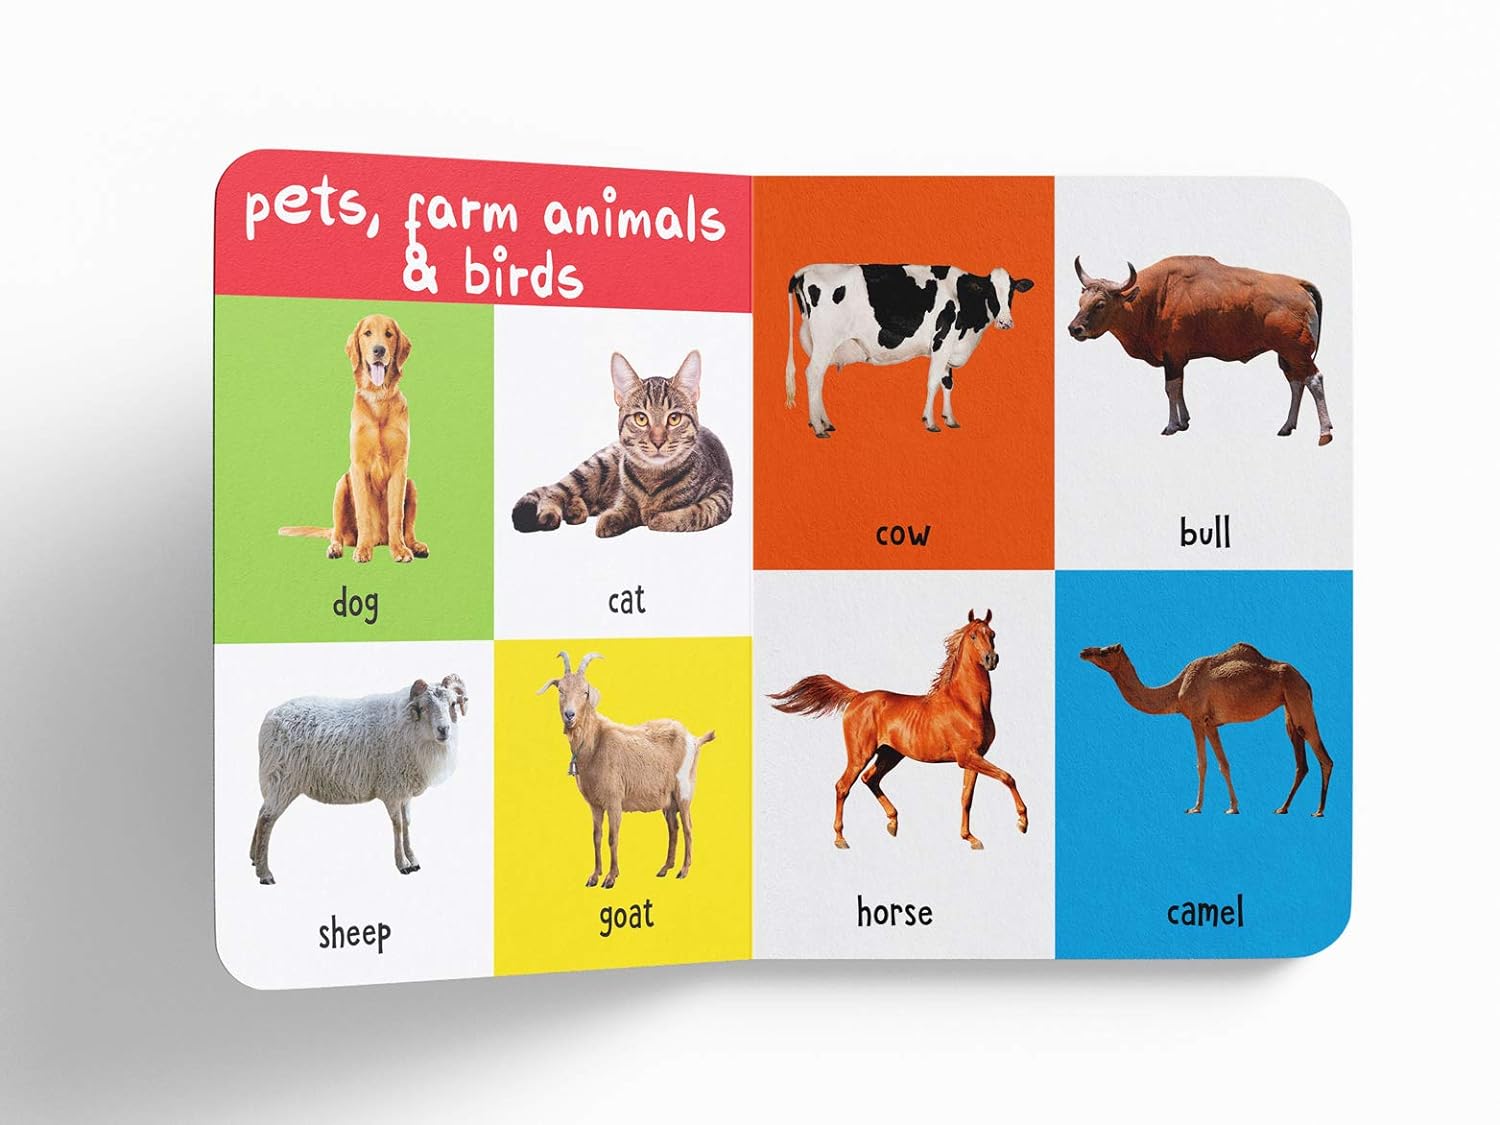 My First 100 Animals and Birds - Padded Board Book Board book